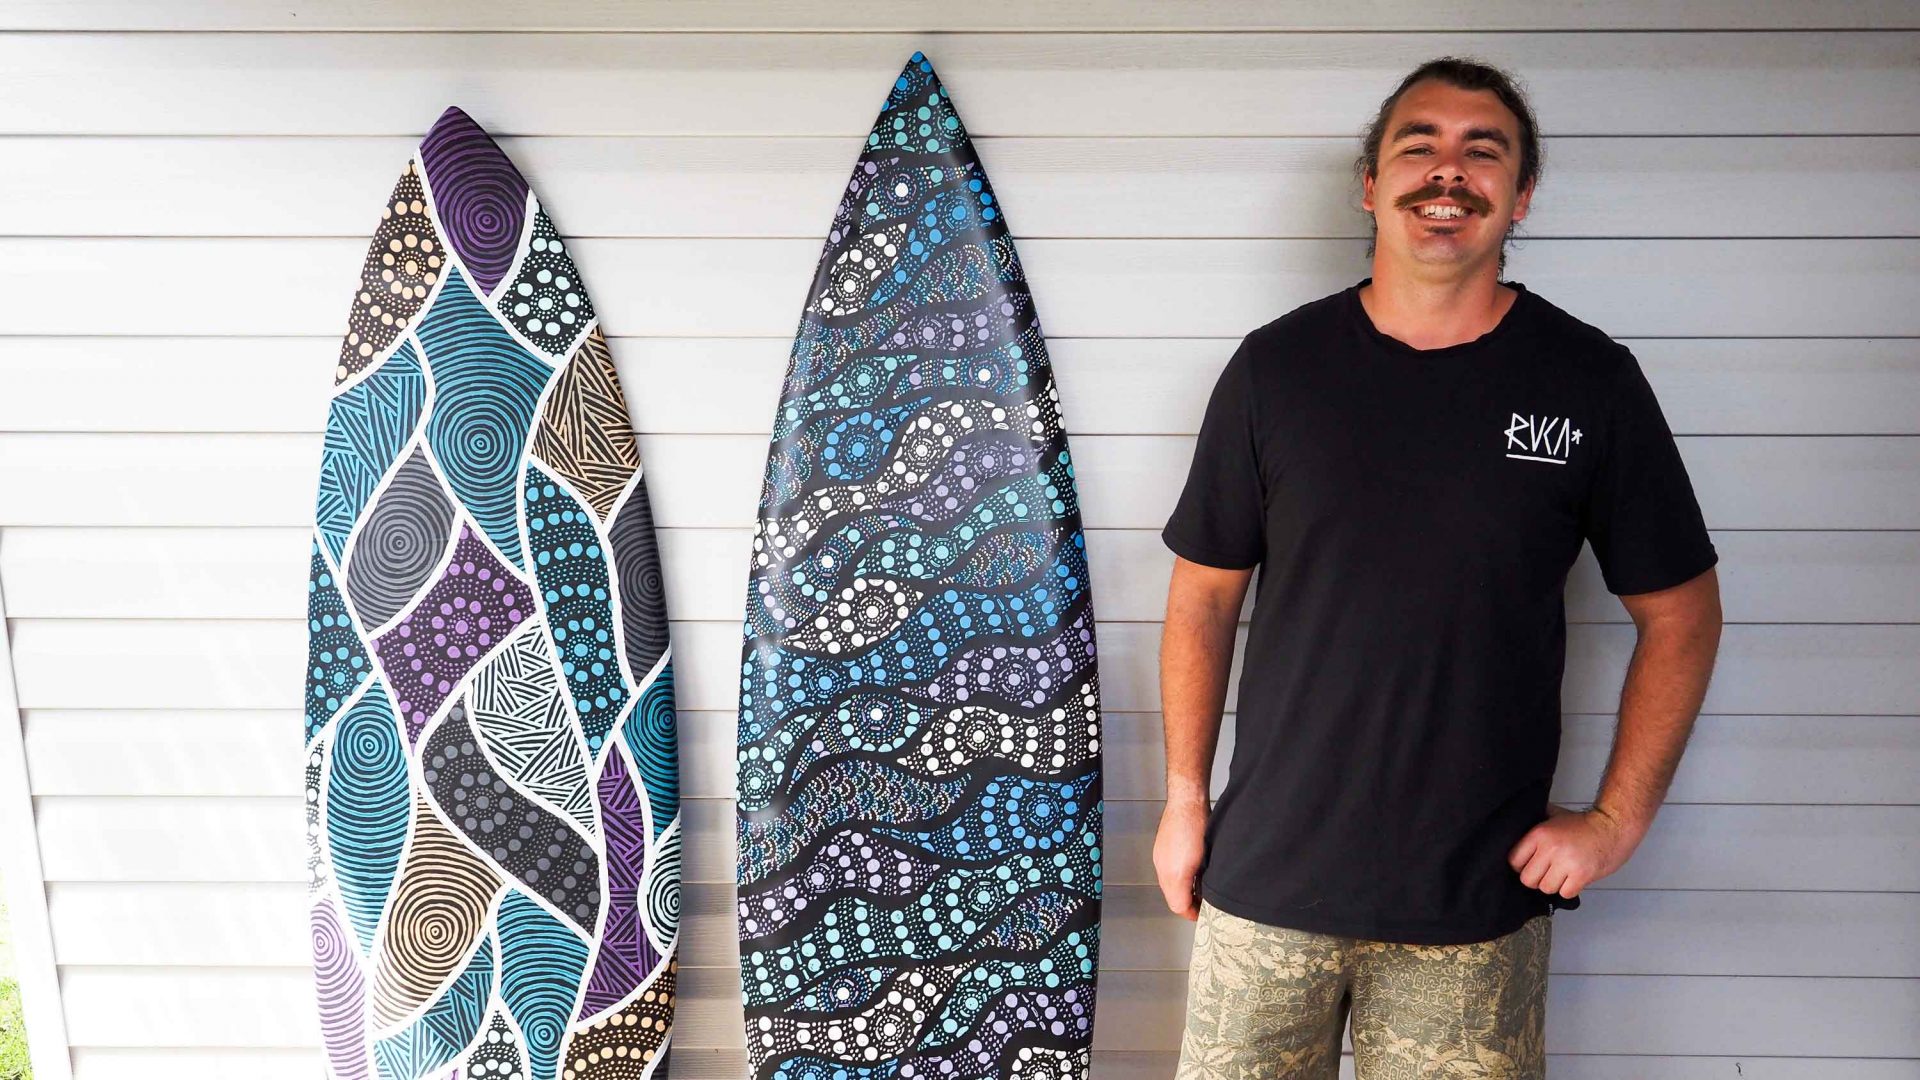 Portrait of Zachary standing alongside his painted surfboards.